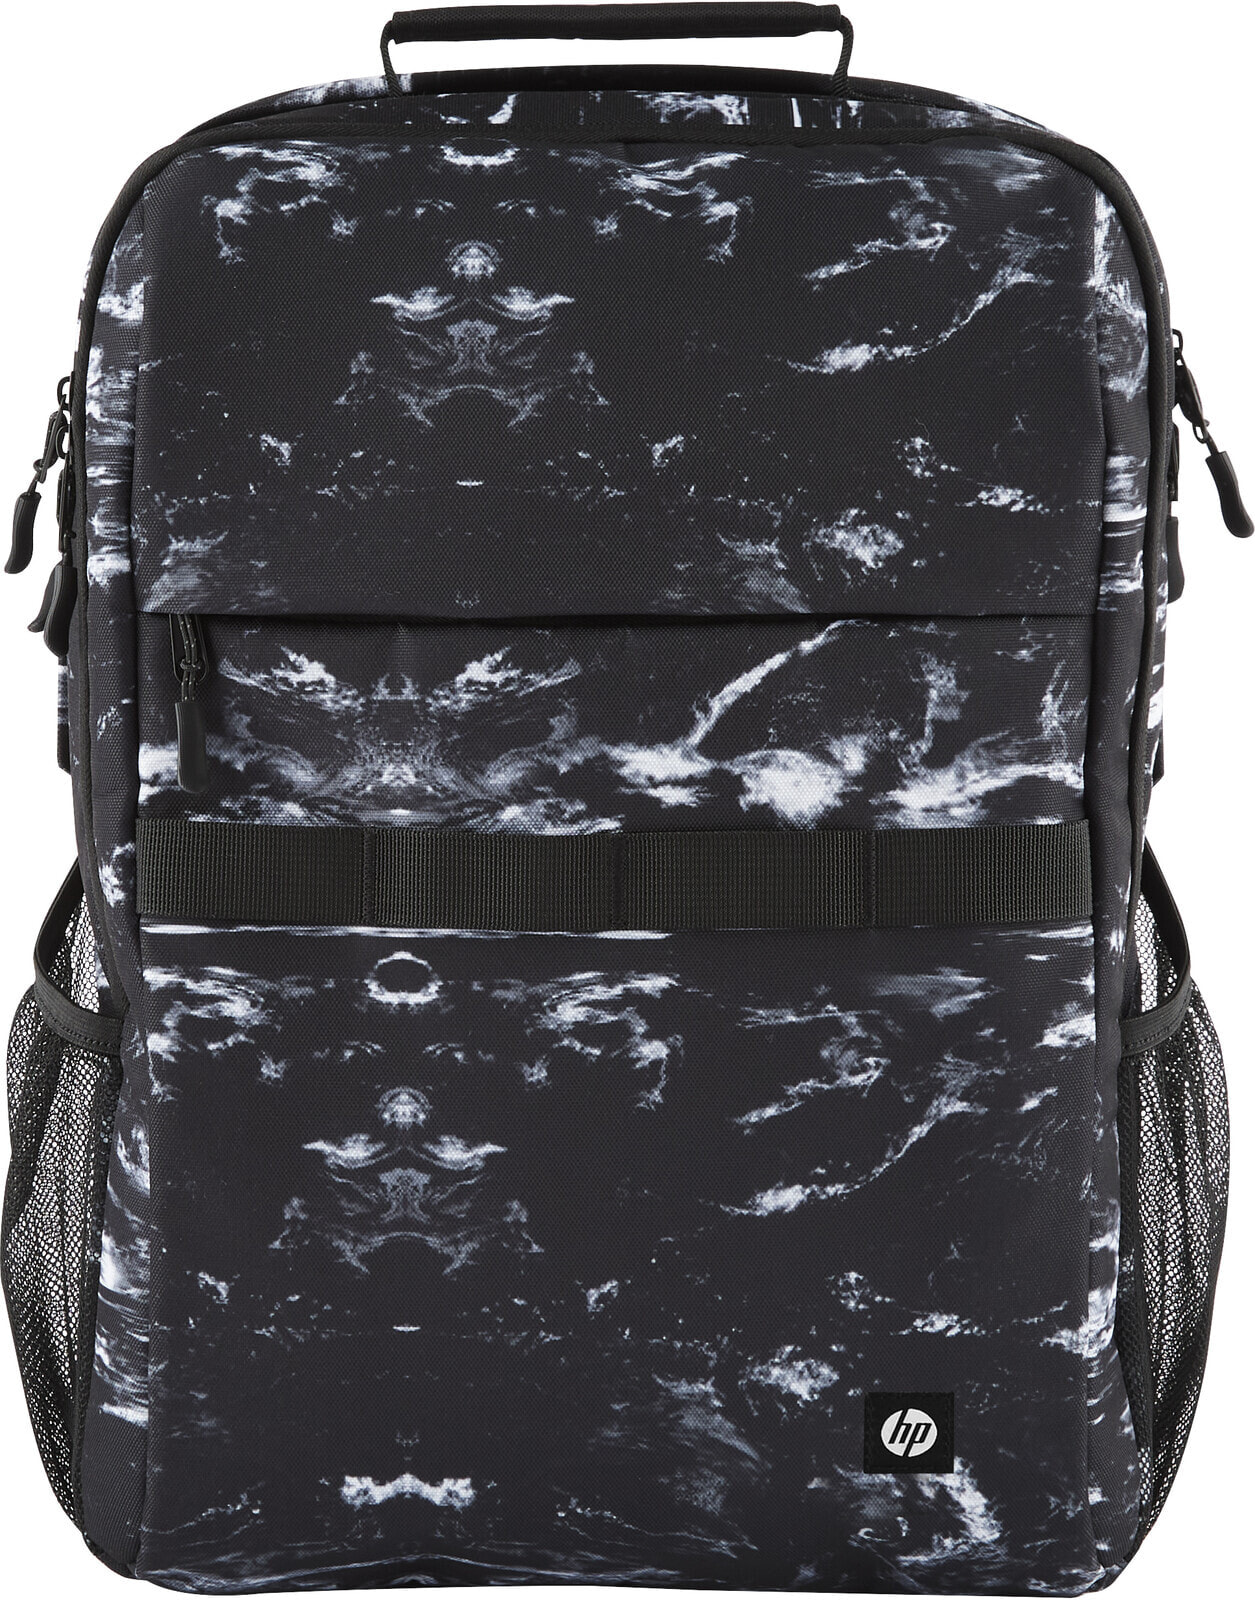 HP Campus XL Marble Stone Backpack - 40.6 cm (16